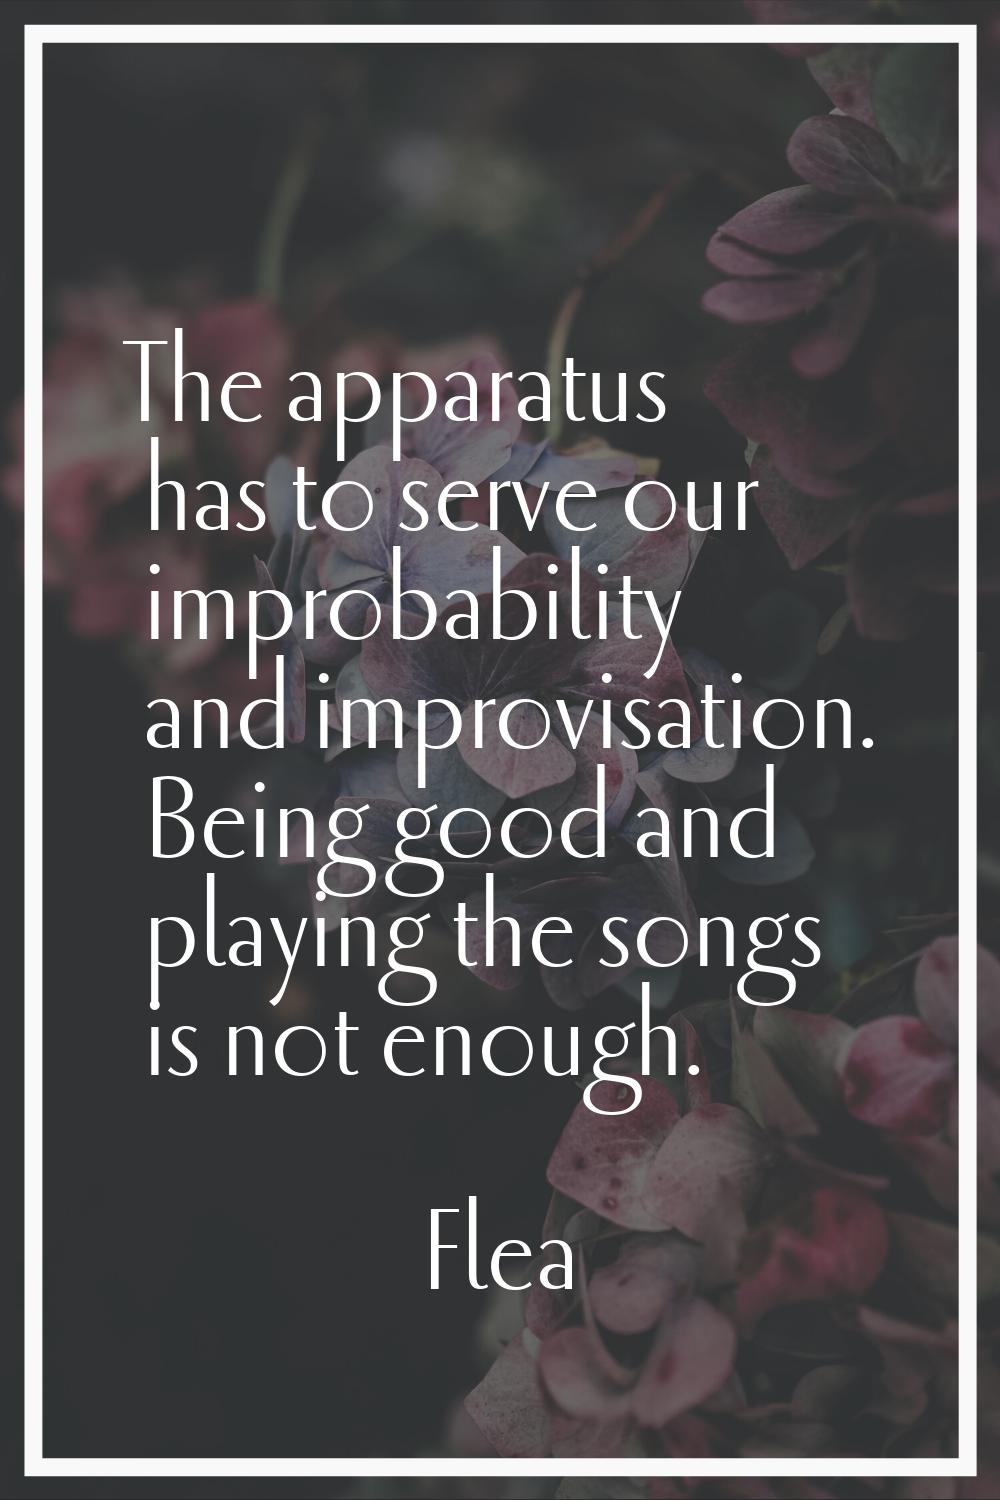 The apparatus has to serve our improbability and improvisation. Being good and playing the songs is